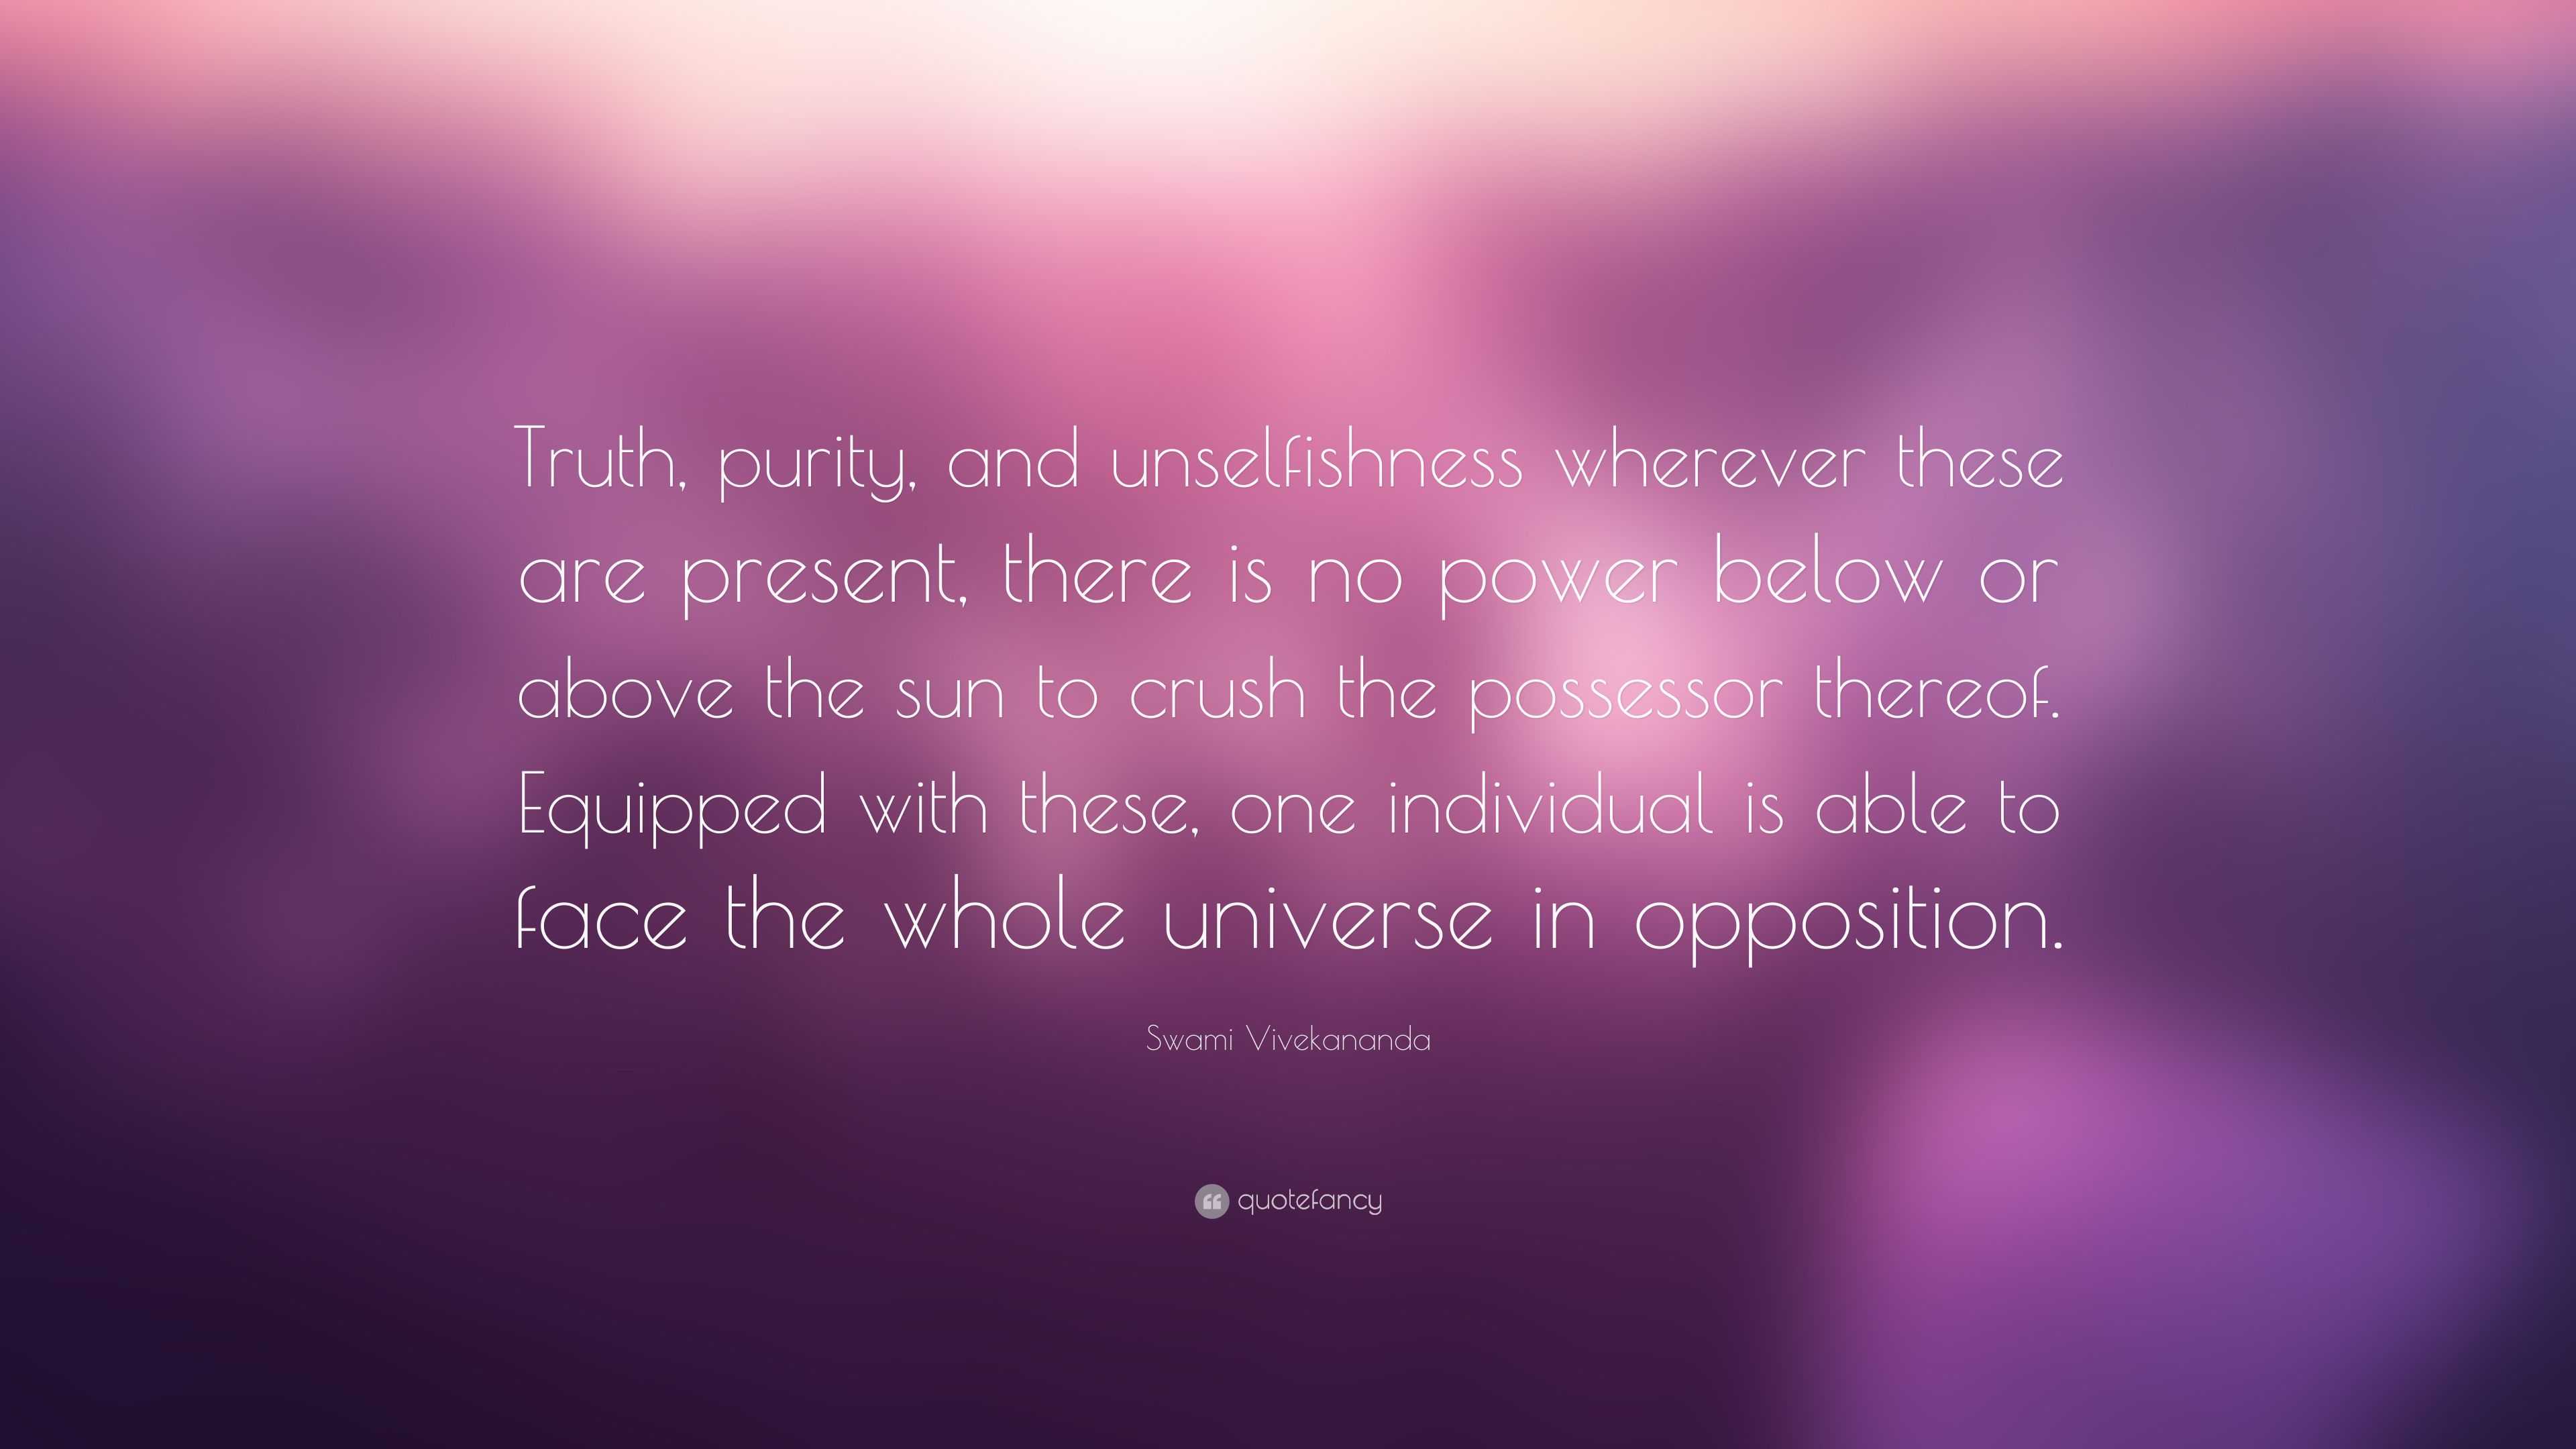 Swami Vivekananda Quote: “Truth, purity, and unselfishness wherever ...